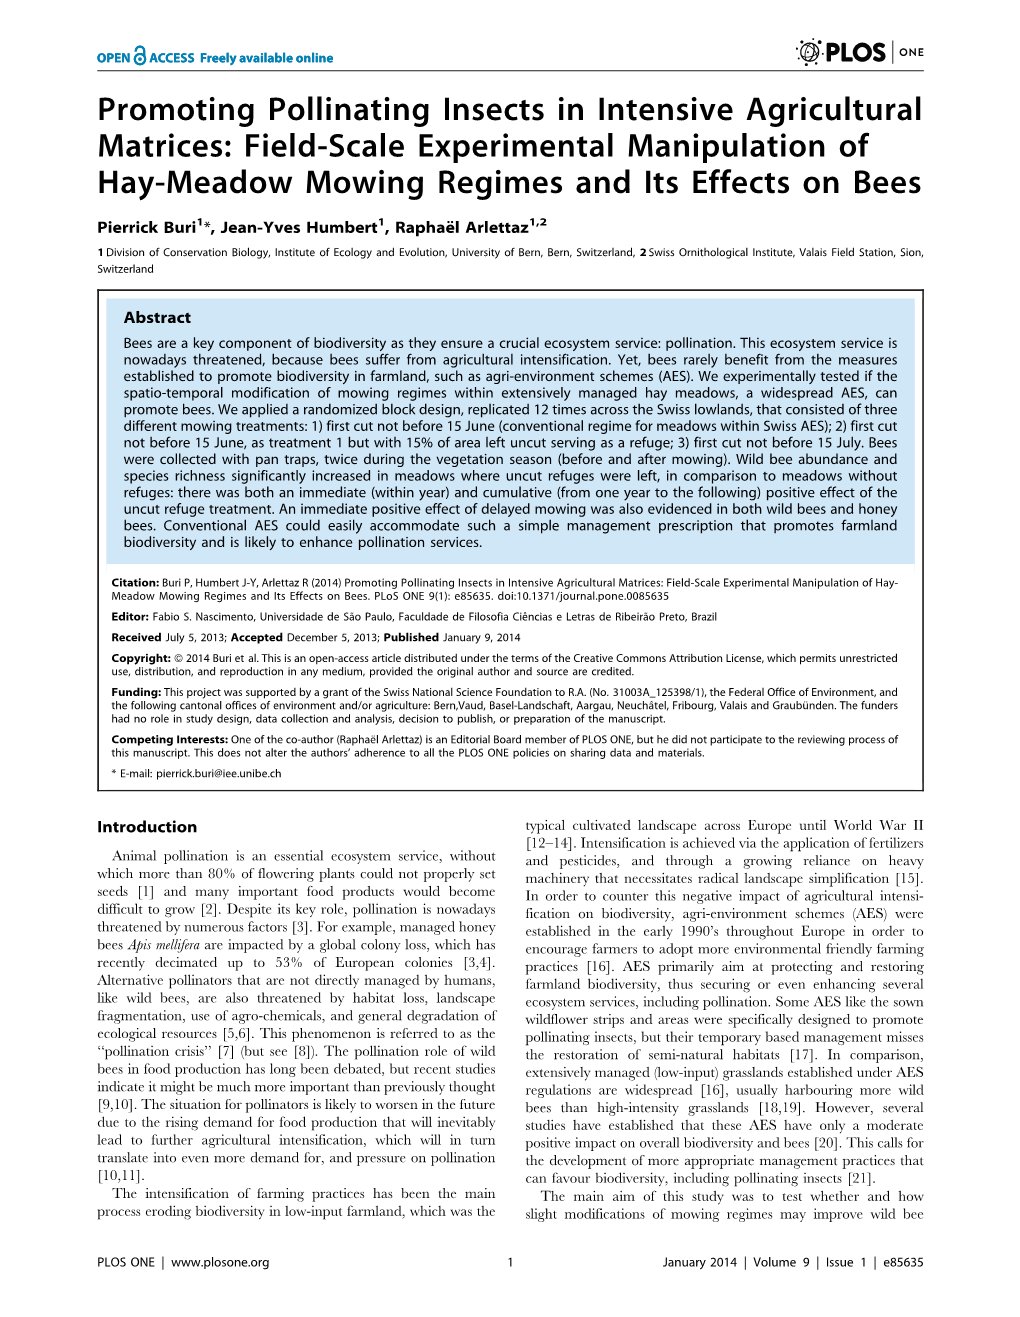 Promoting Pollinating Insects in Intensive Agricultural Matrices: Field-Scale Experimental Manipulation of Hay-Meadow Mowing Regimes and Its Effects on Bees